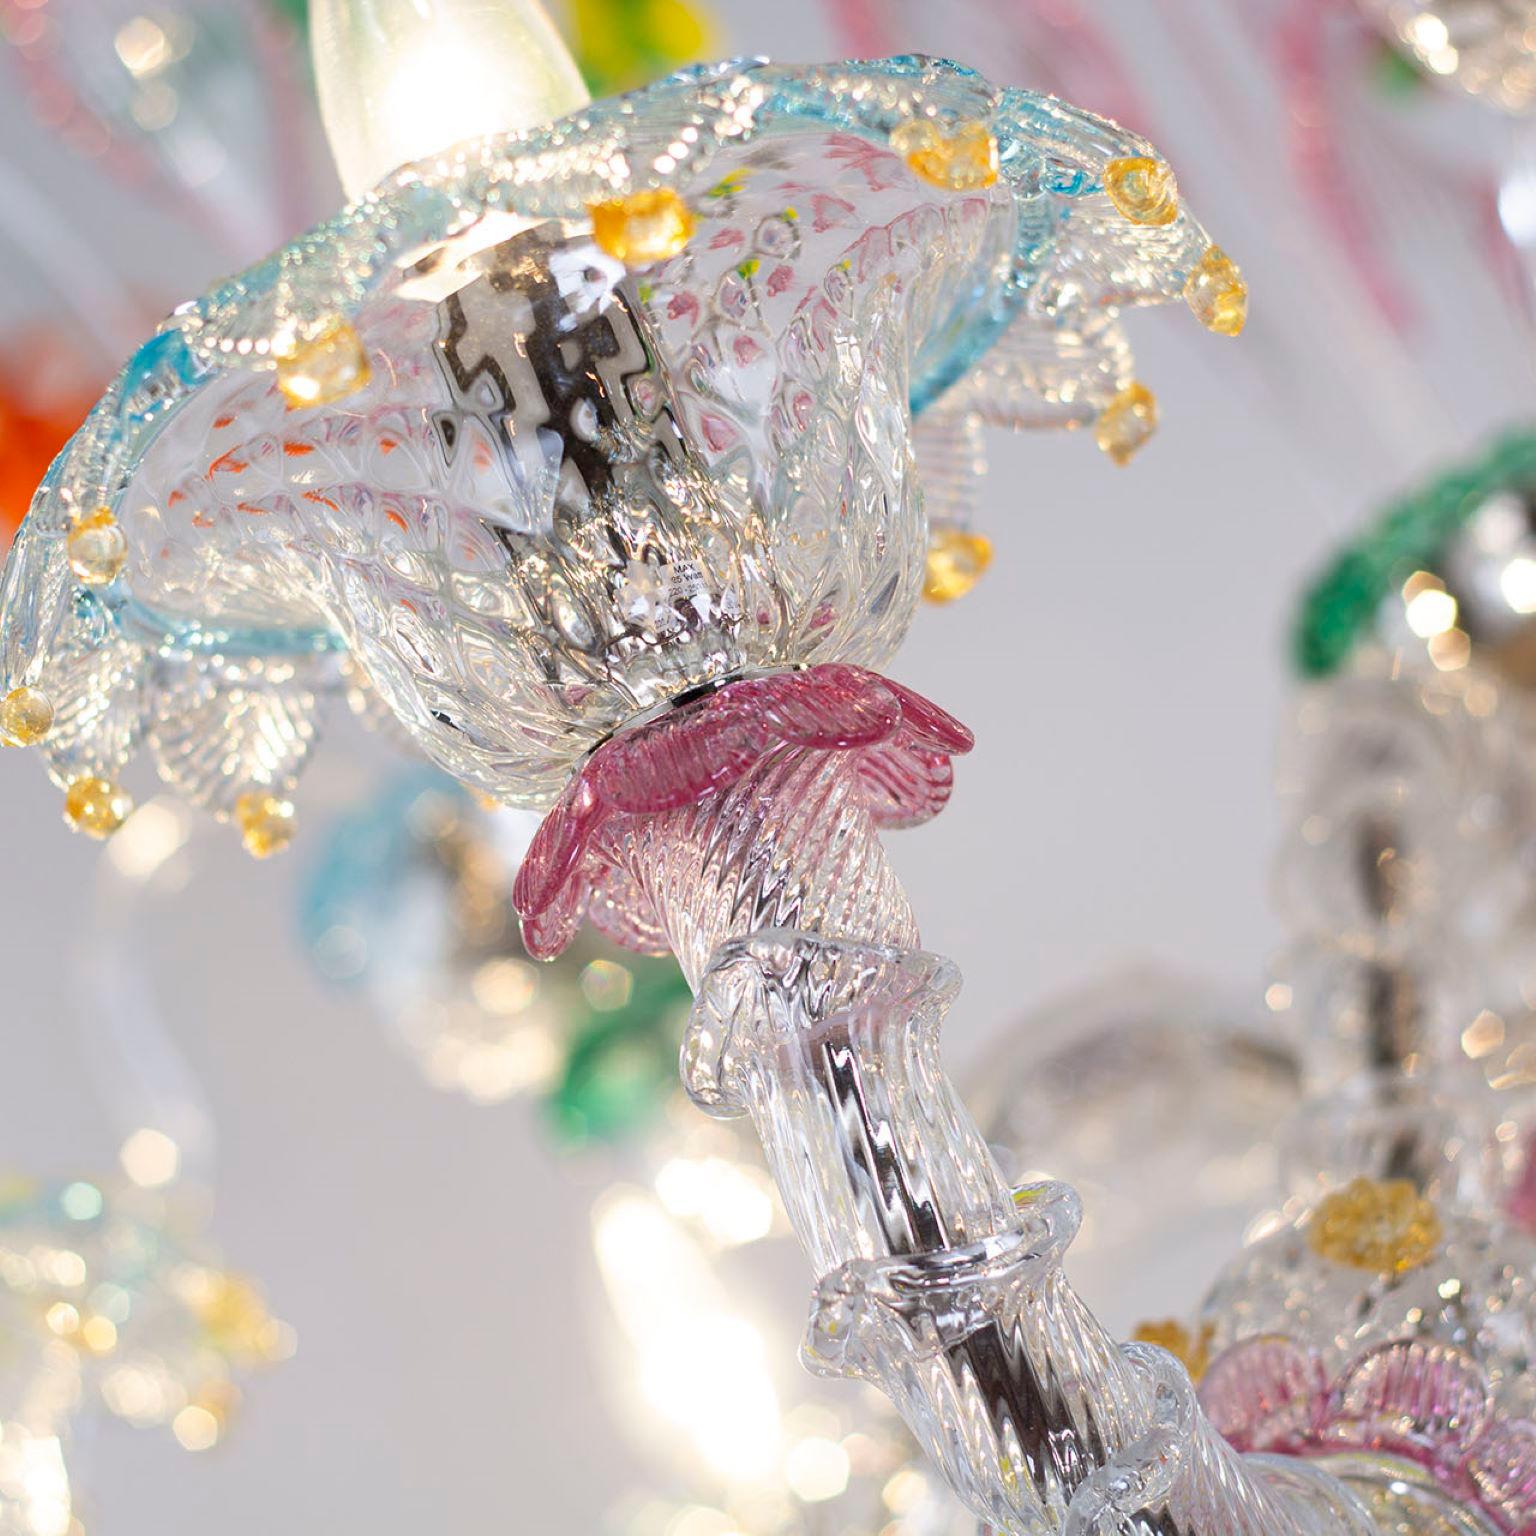 Rezzonico chandelier 6 arms, clear Murano glass with colorful details in vitreous paste by Multiforme.
This chandelier is the combination of the traditional Venetian structure with gaudy colors. A peculiar lighting works, lively and exuberant.
This